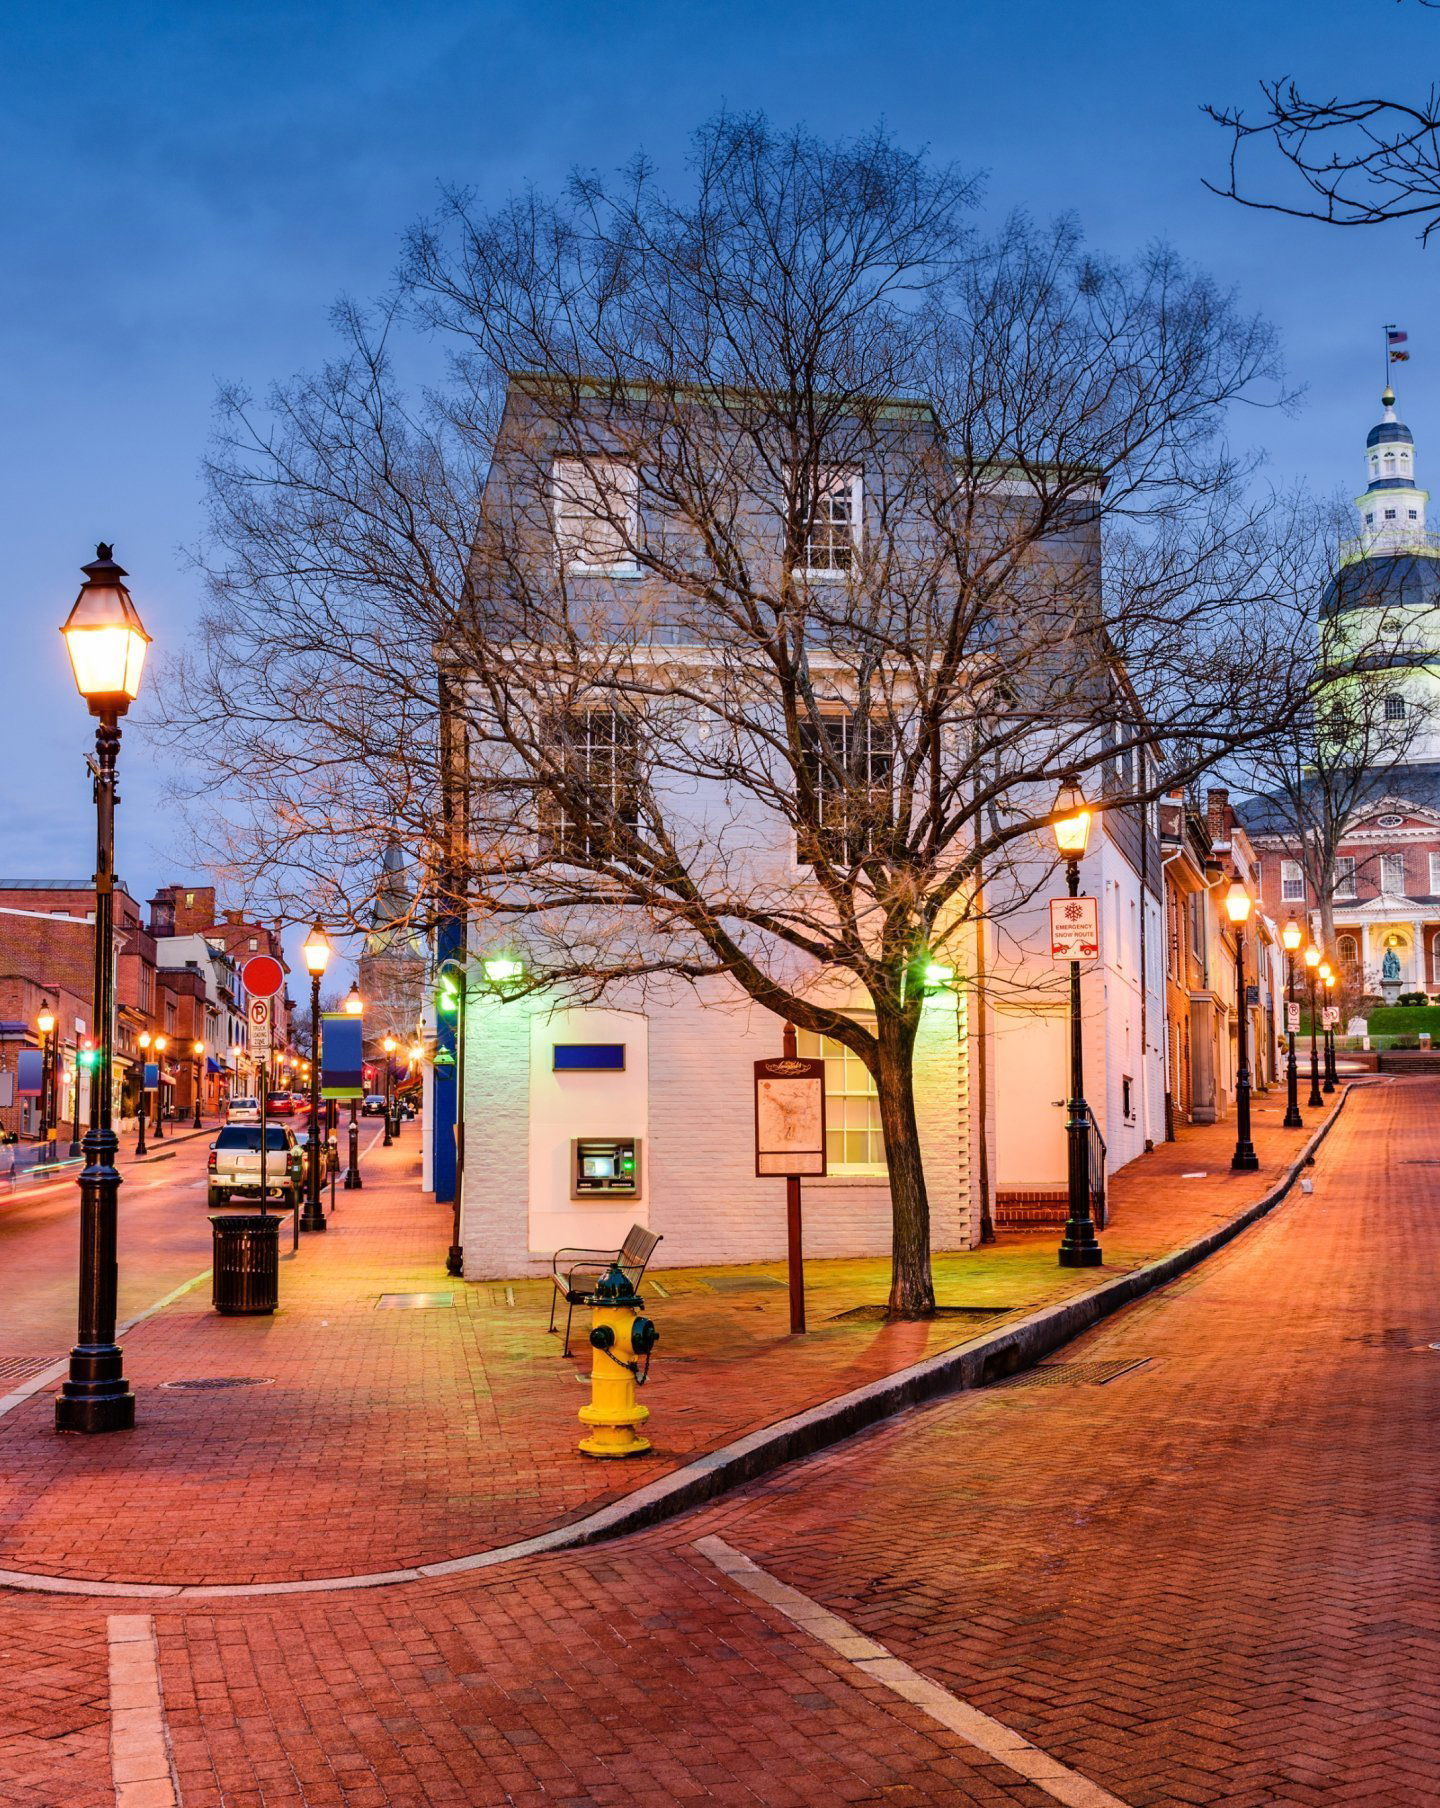 Downtown Maryland at night with street lamps all lit